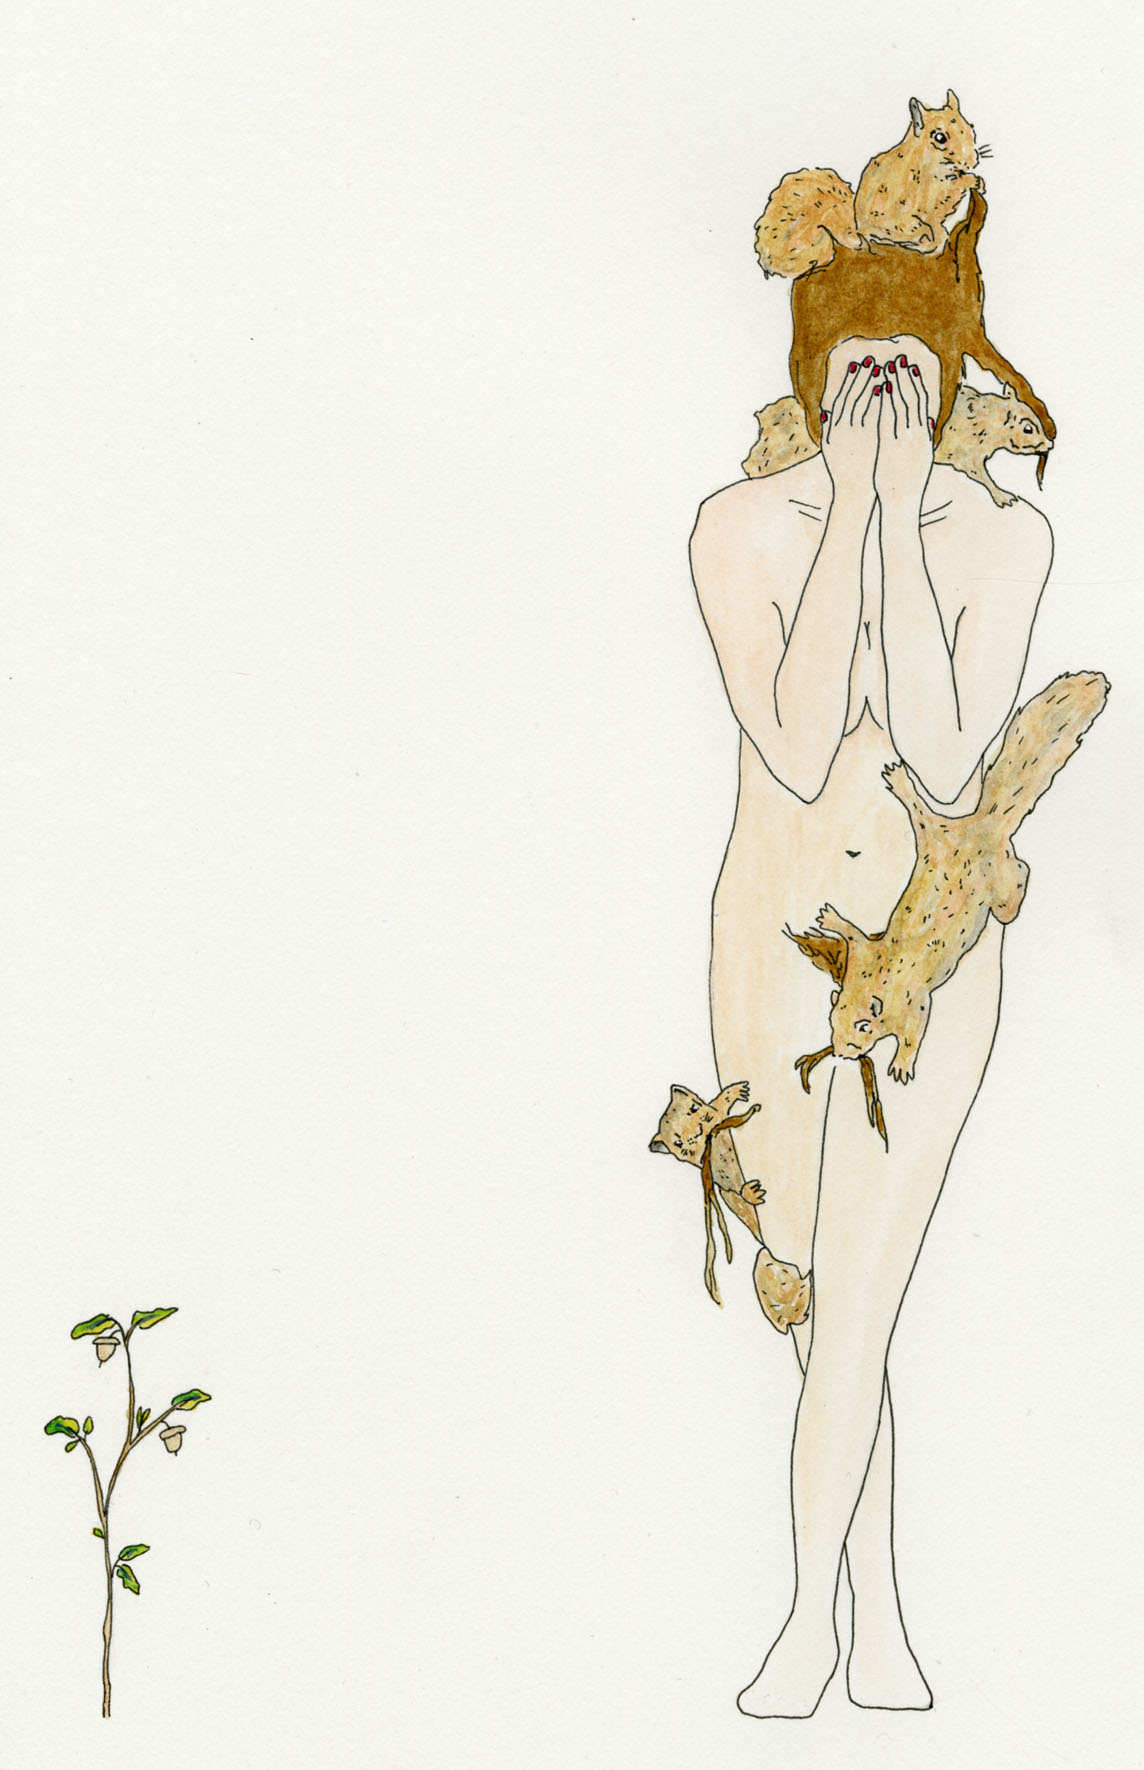 Megan Billman, Miss narrative live (2008): Water color and ink on paper, 10 1/2 by 7 5/8 inches.